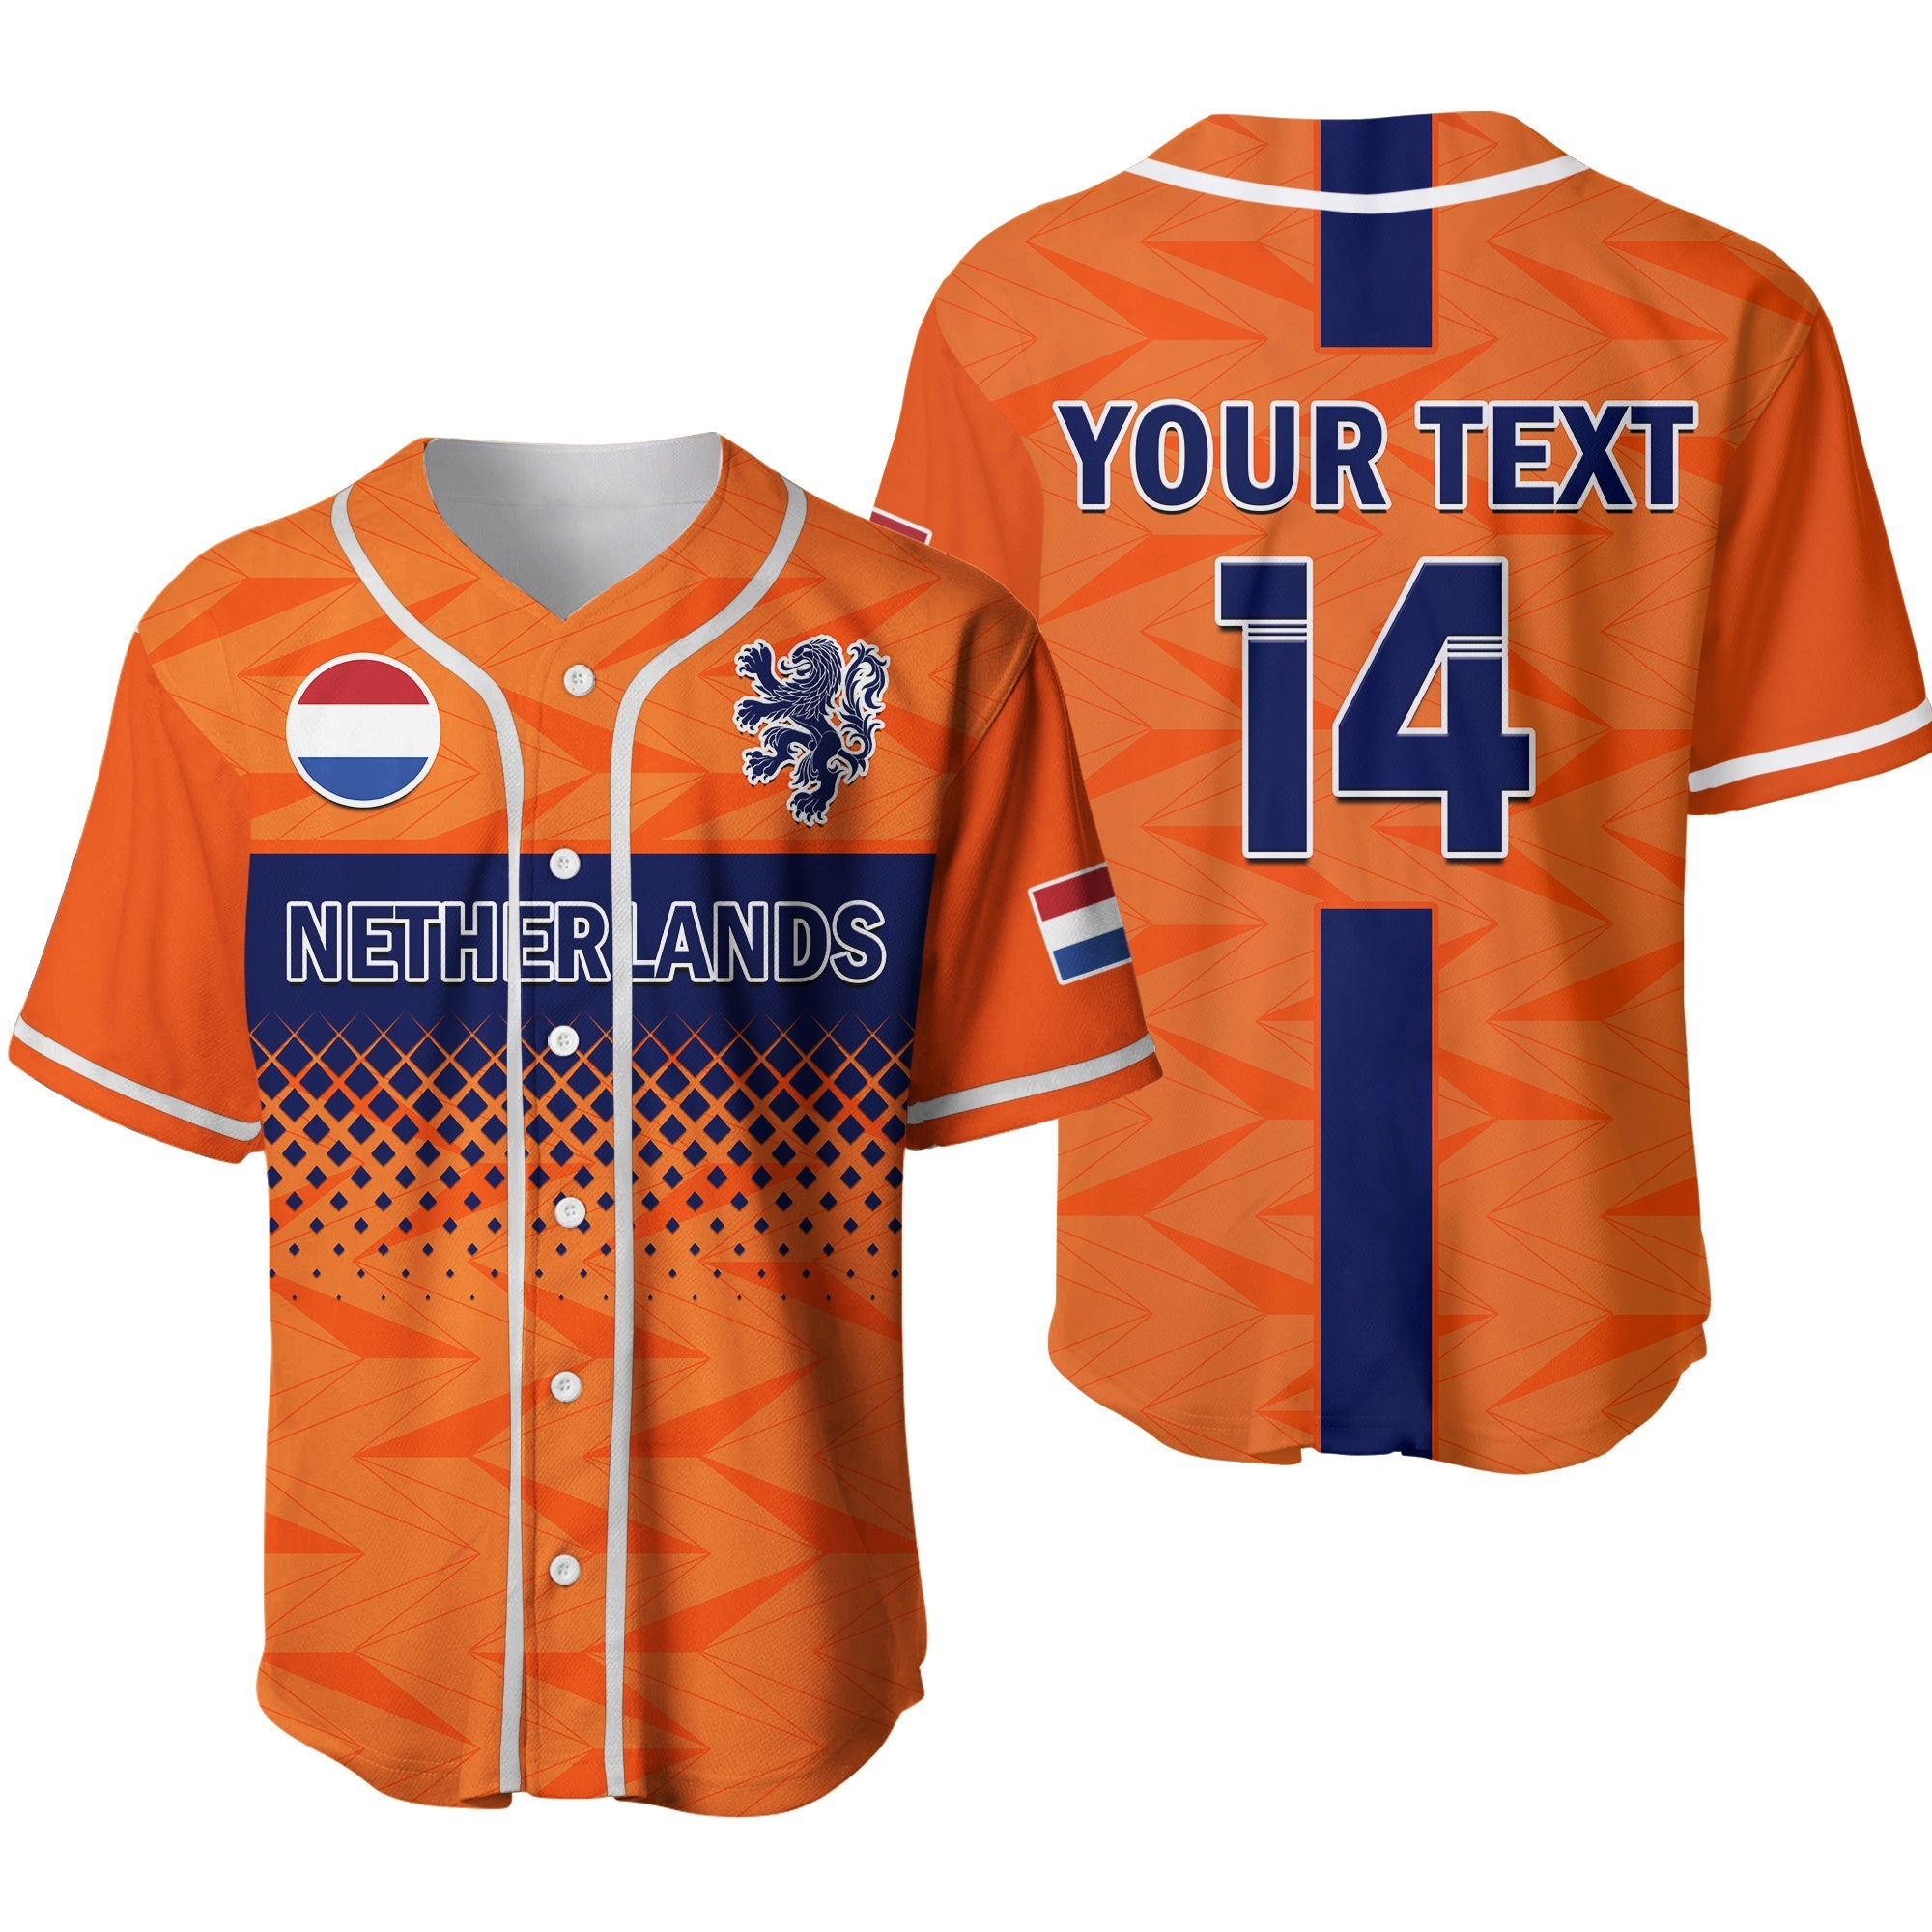 custom-text-and-number-netherlands-football-baseball-jersey-holland-world-cup-2022-ver02